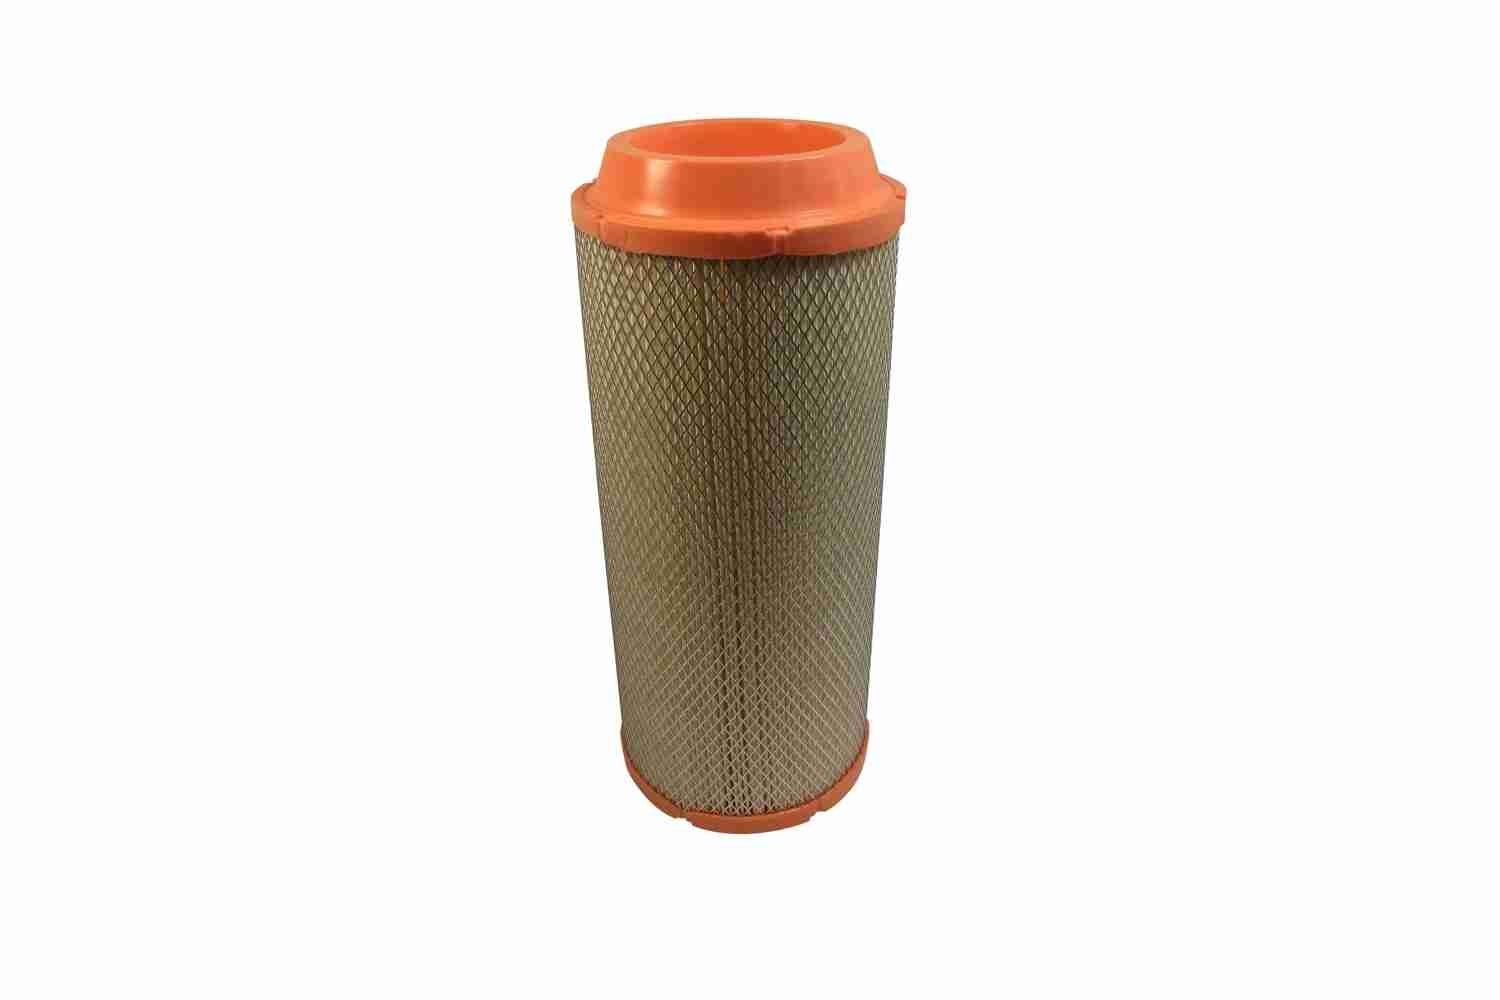 VAICO V30-0850 Air filter cheap in online store